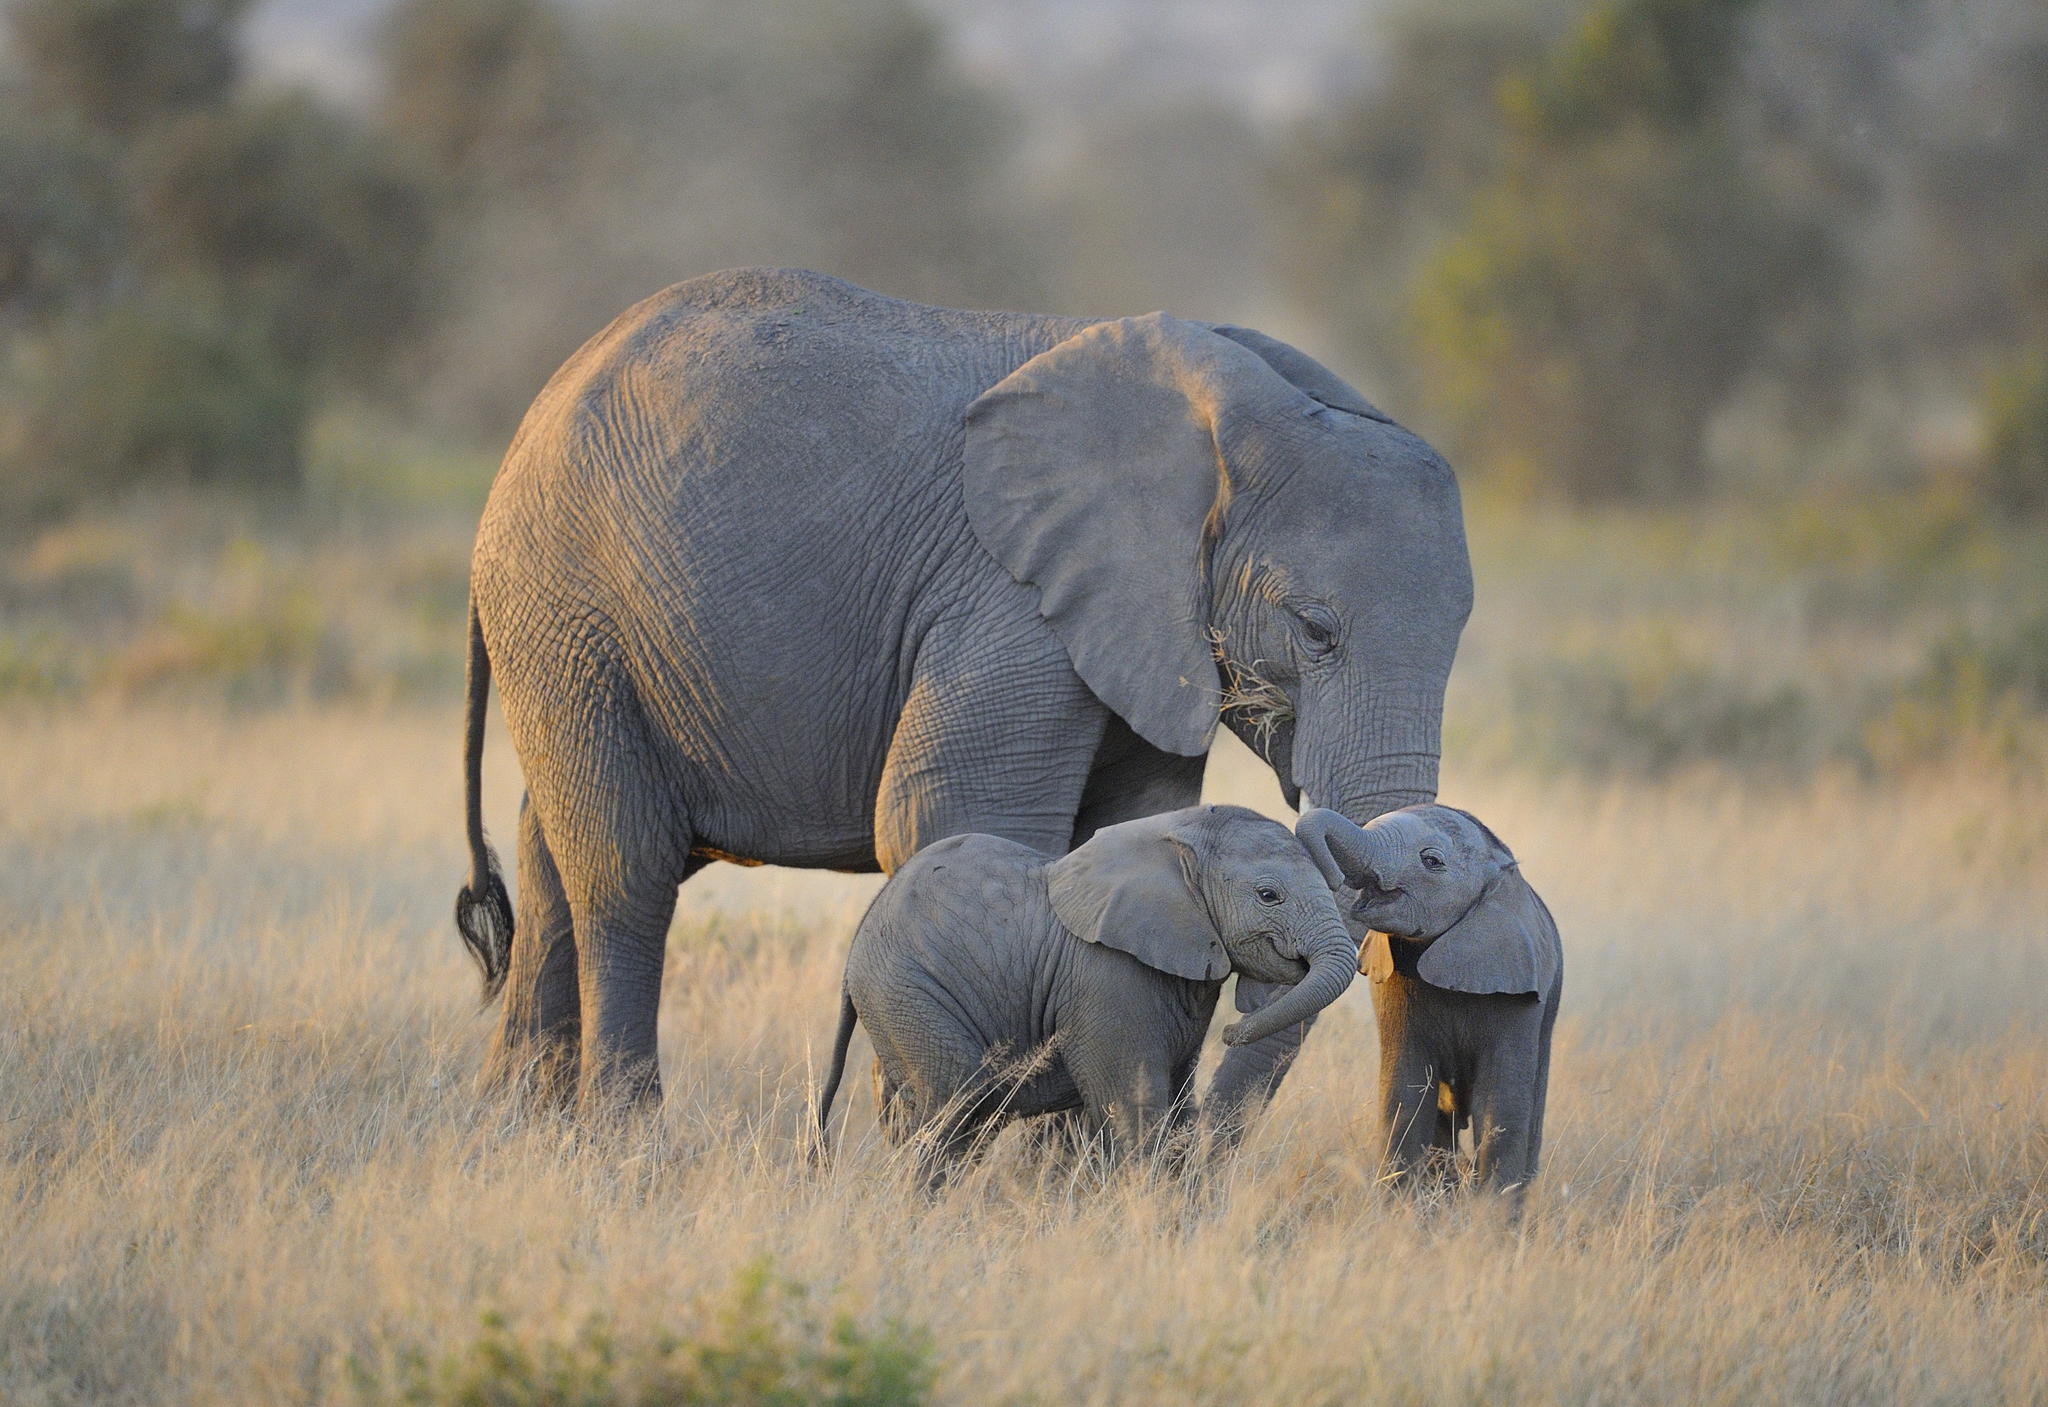 29 Adorable Photos Of Baby Elephants To Brighten Up Your Day